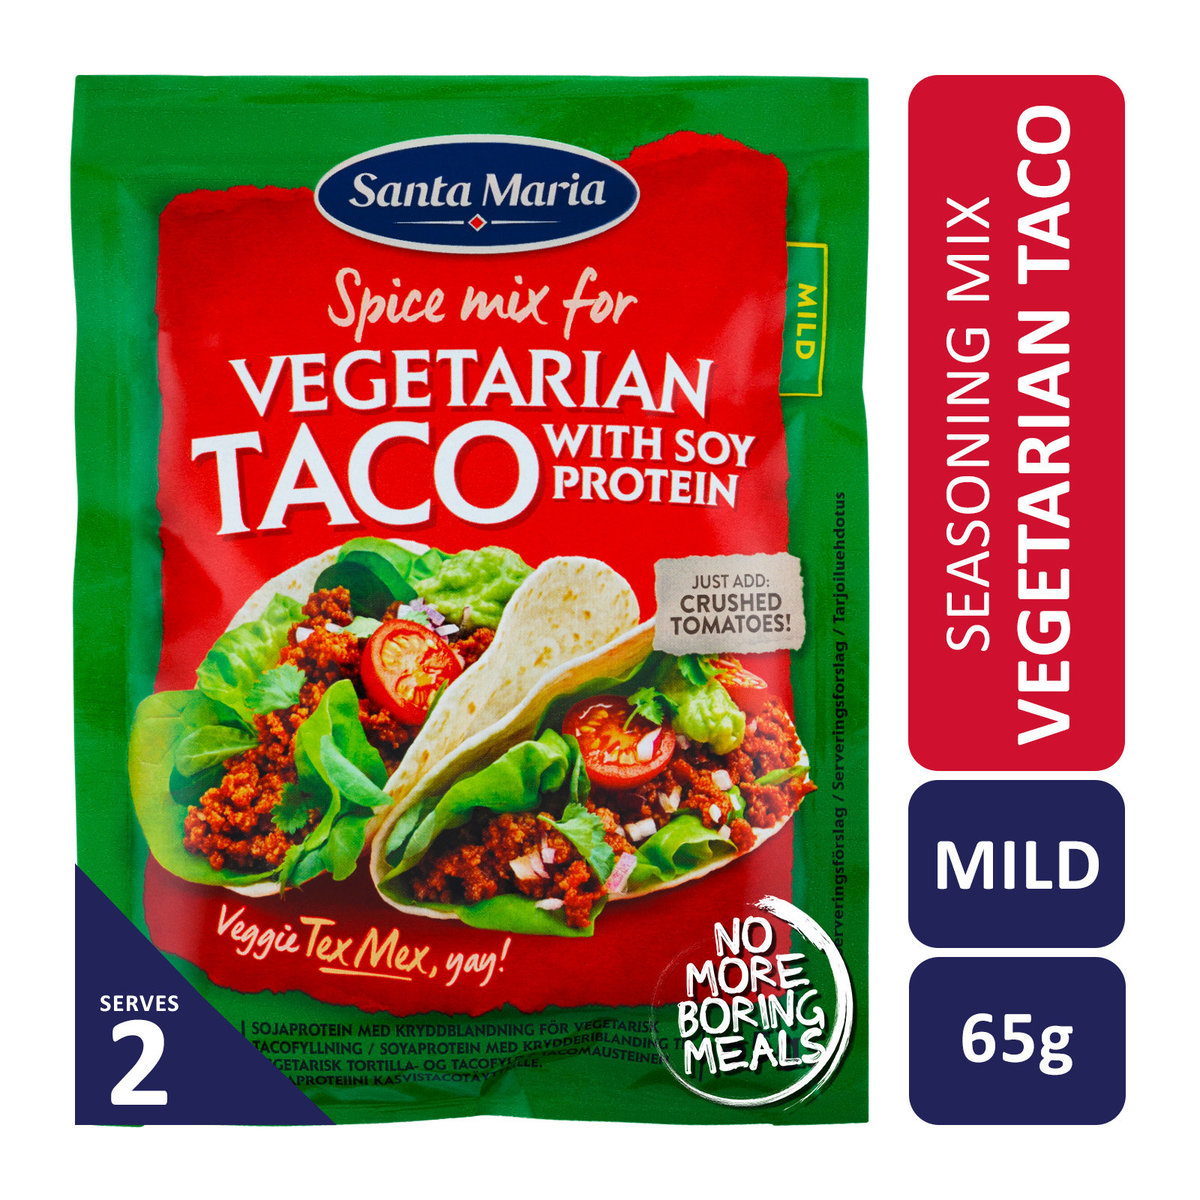 Spice Mix for Vegetarian Taco with Soy Protein  65g (Best before: 17 Nov 2024)